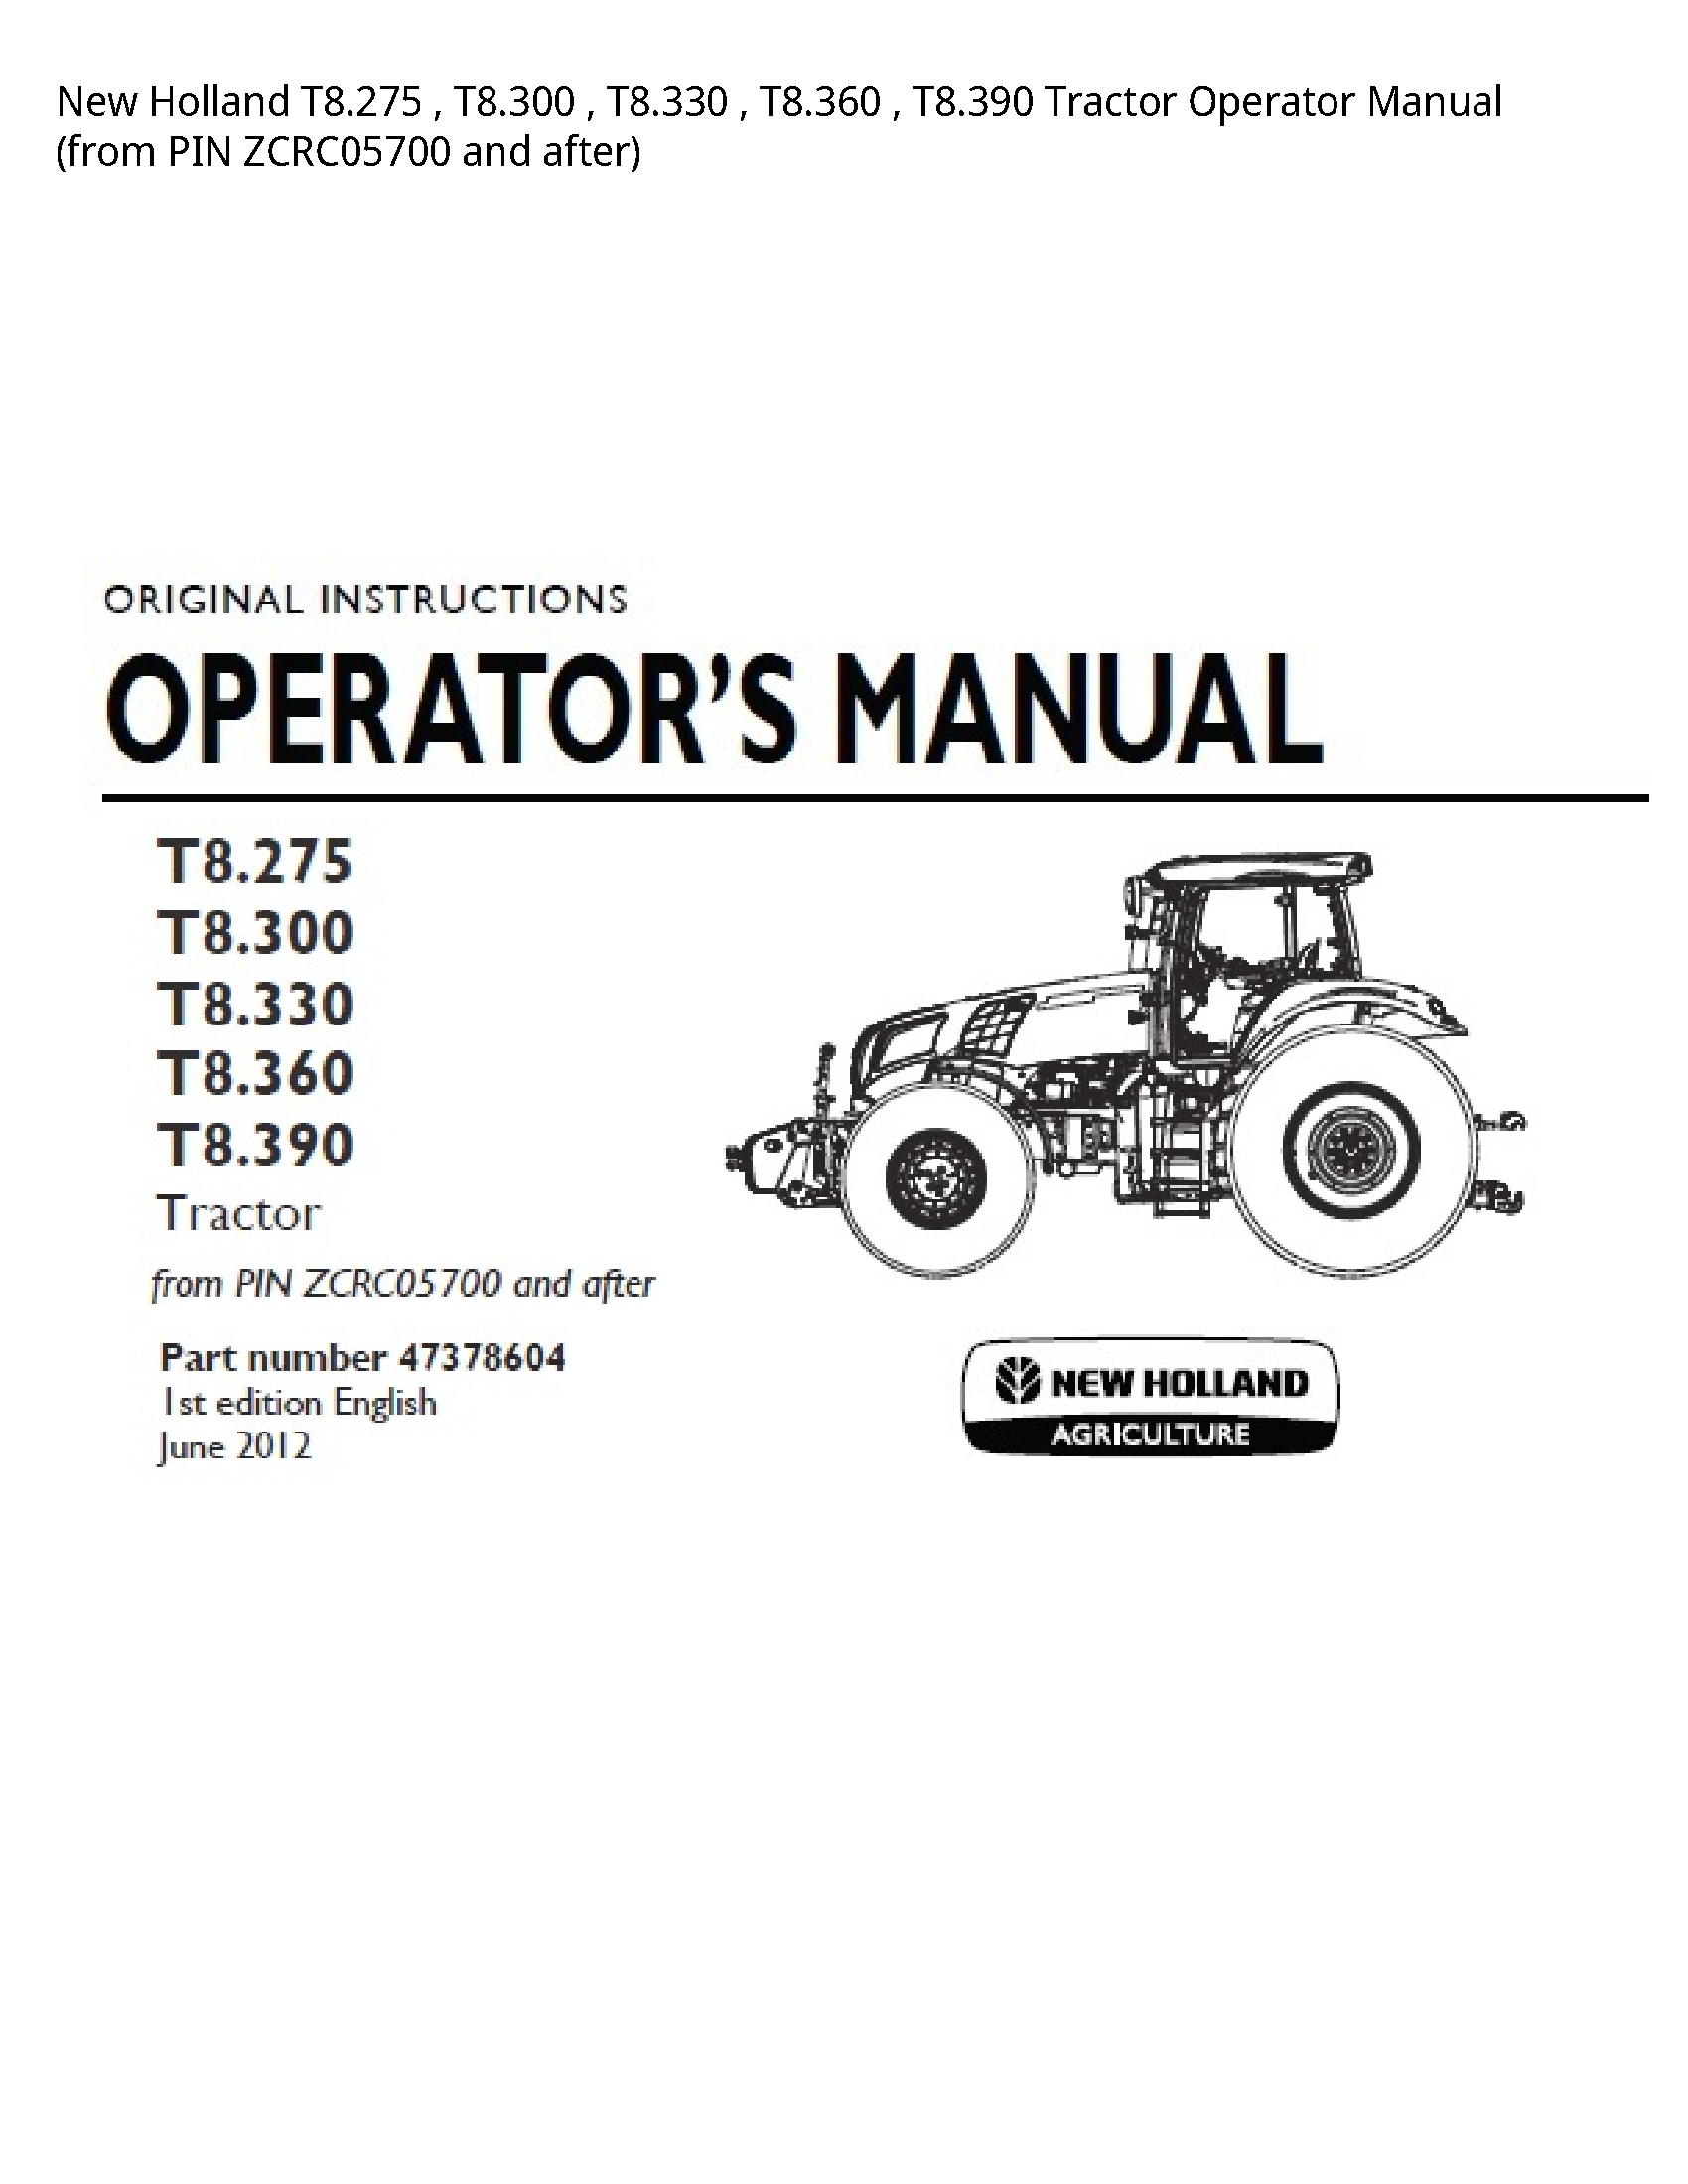 New Holland T8.275 Tractor Operator manual